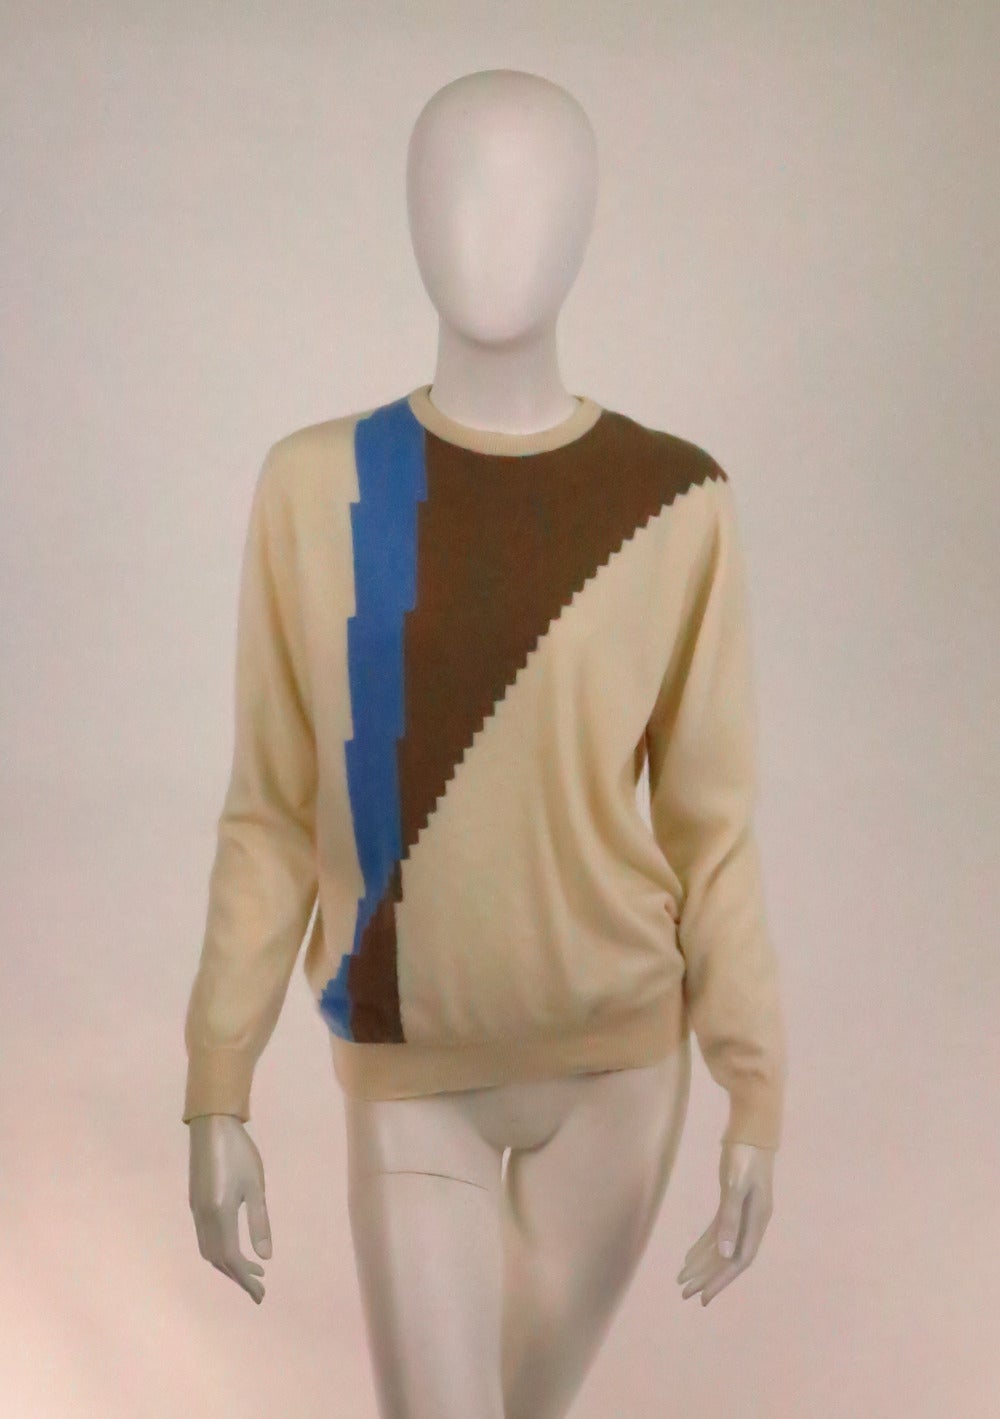 From the 1970s,James Pringle of Scotland, colour block pull over sweater...Creamy off white with pale cocoa & blue intarsia knit...Round neckline, long sleeves with ribbed cuffs, ribbed hem...Fits like a S-M

In excellent wearable condition... All